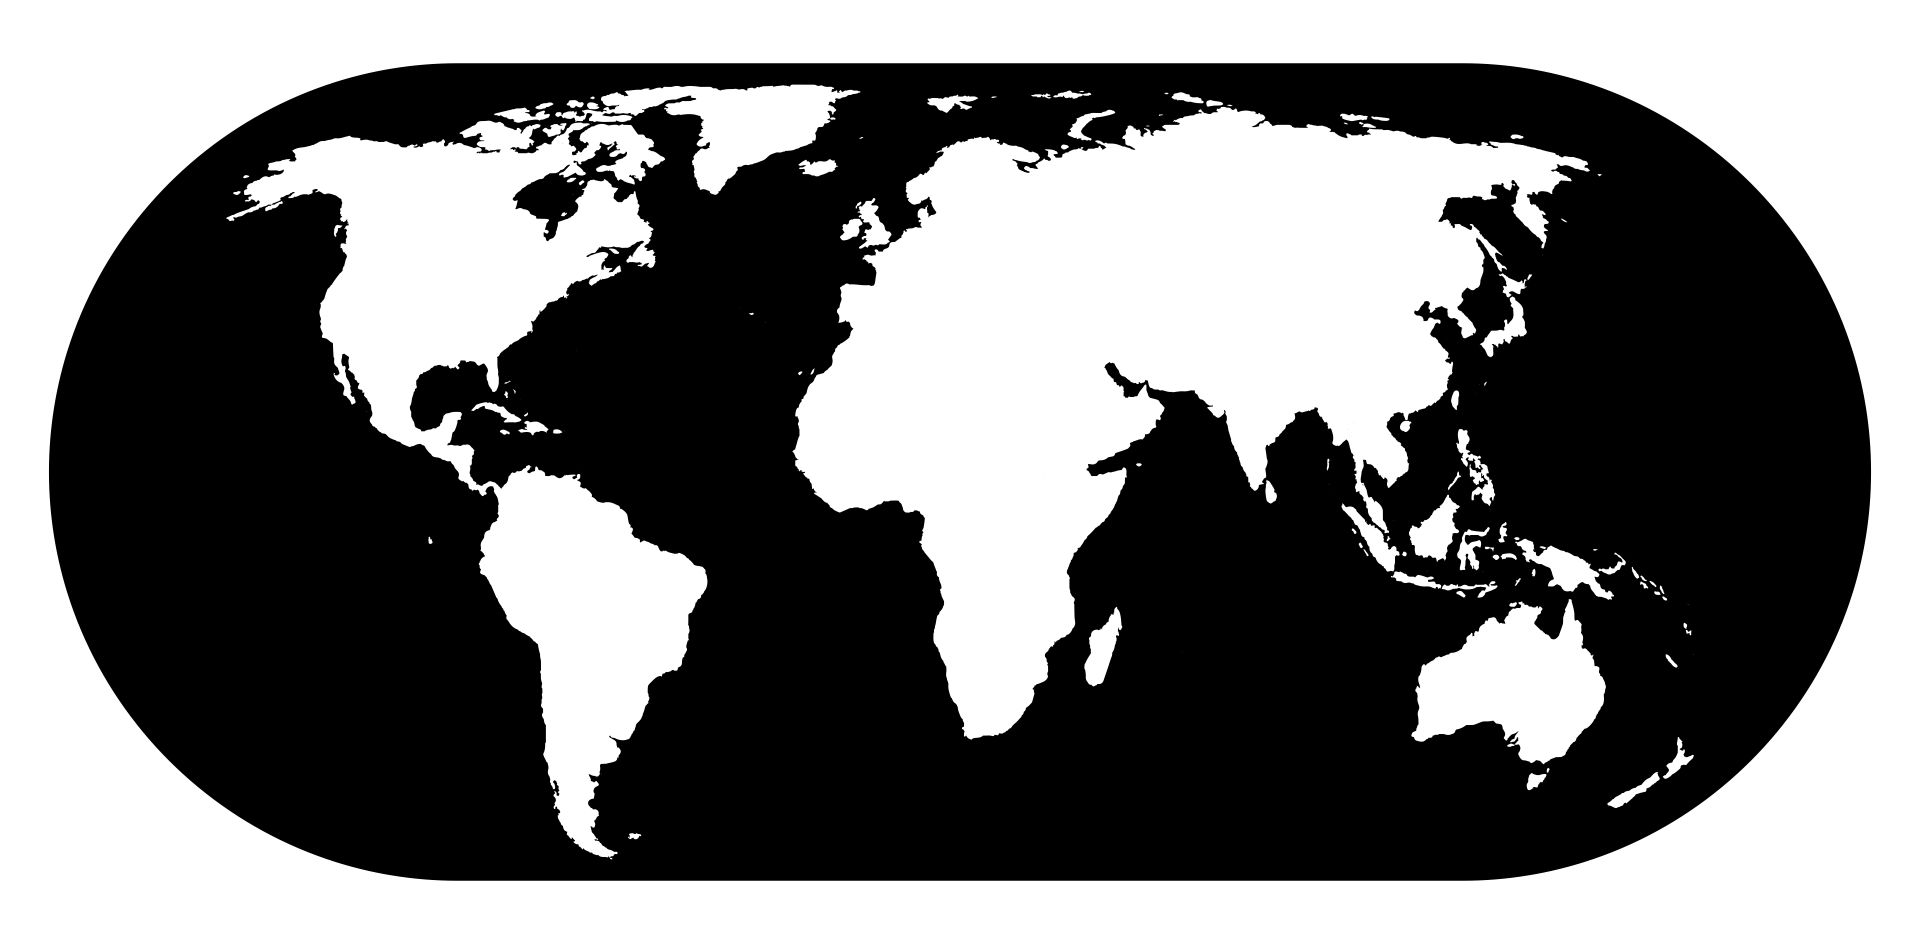 world-map-black-and-white-black-and-white-world-map-world-map-images